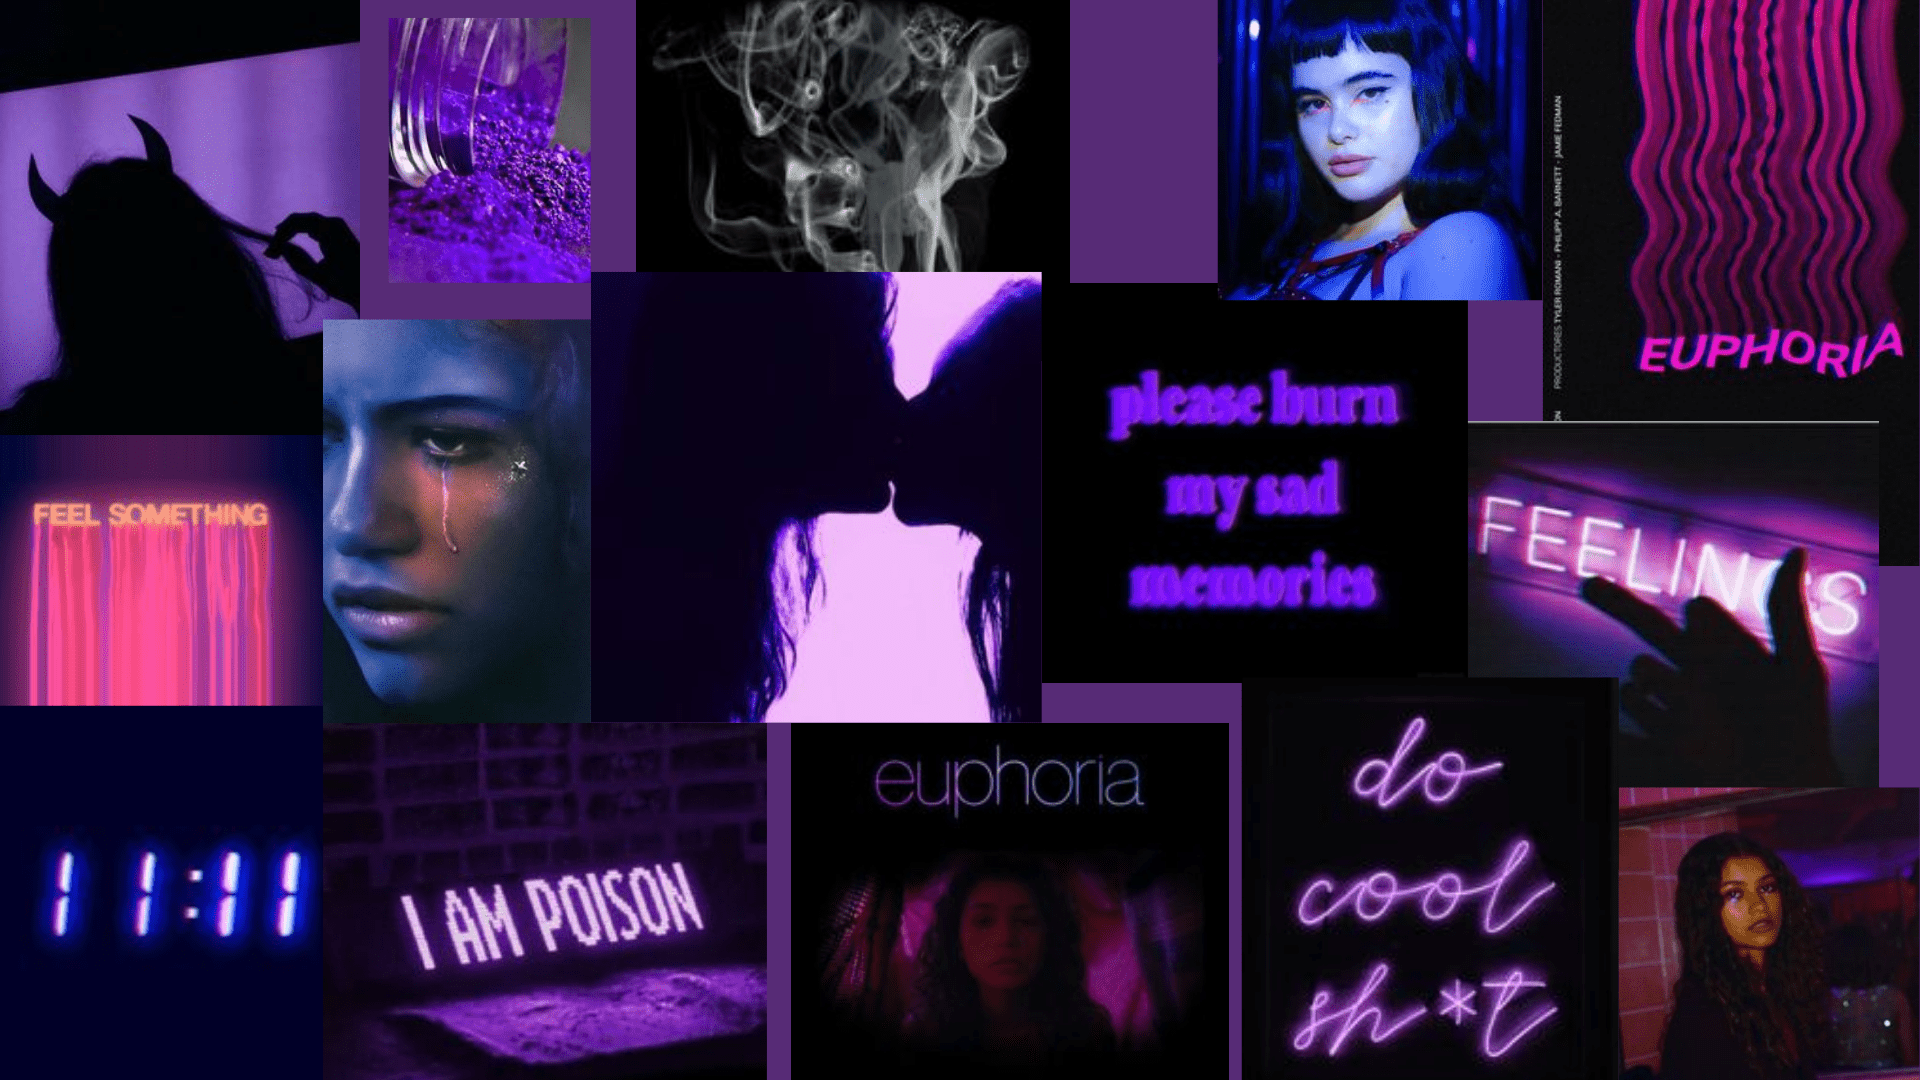 A collection of purple and black images - IMac, Euphoria